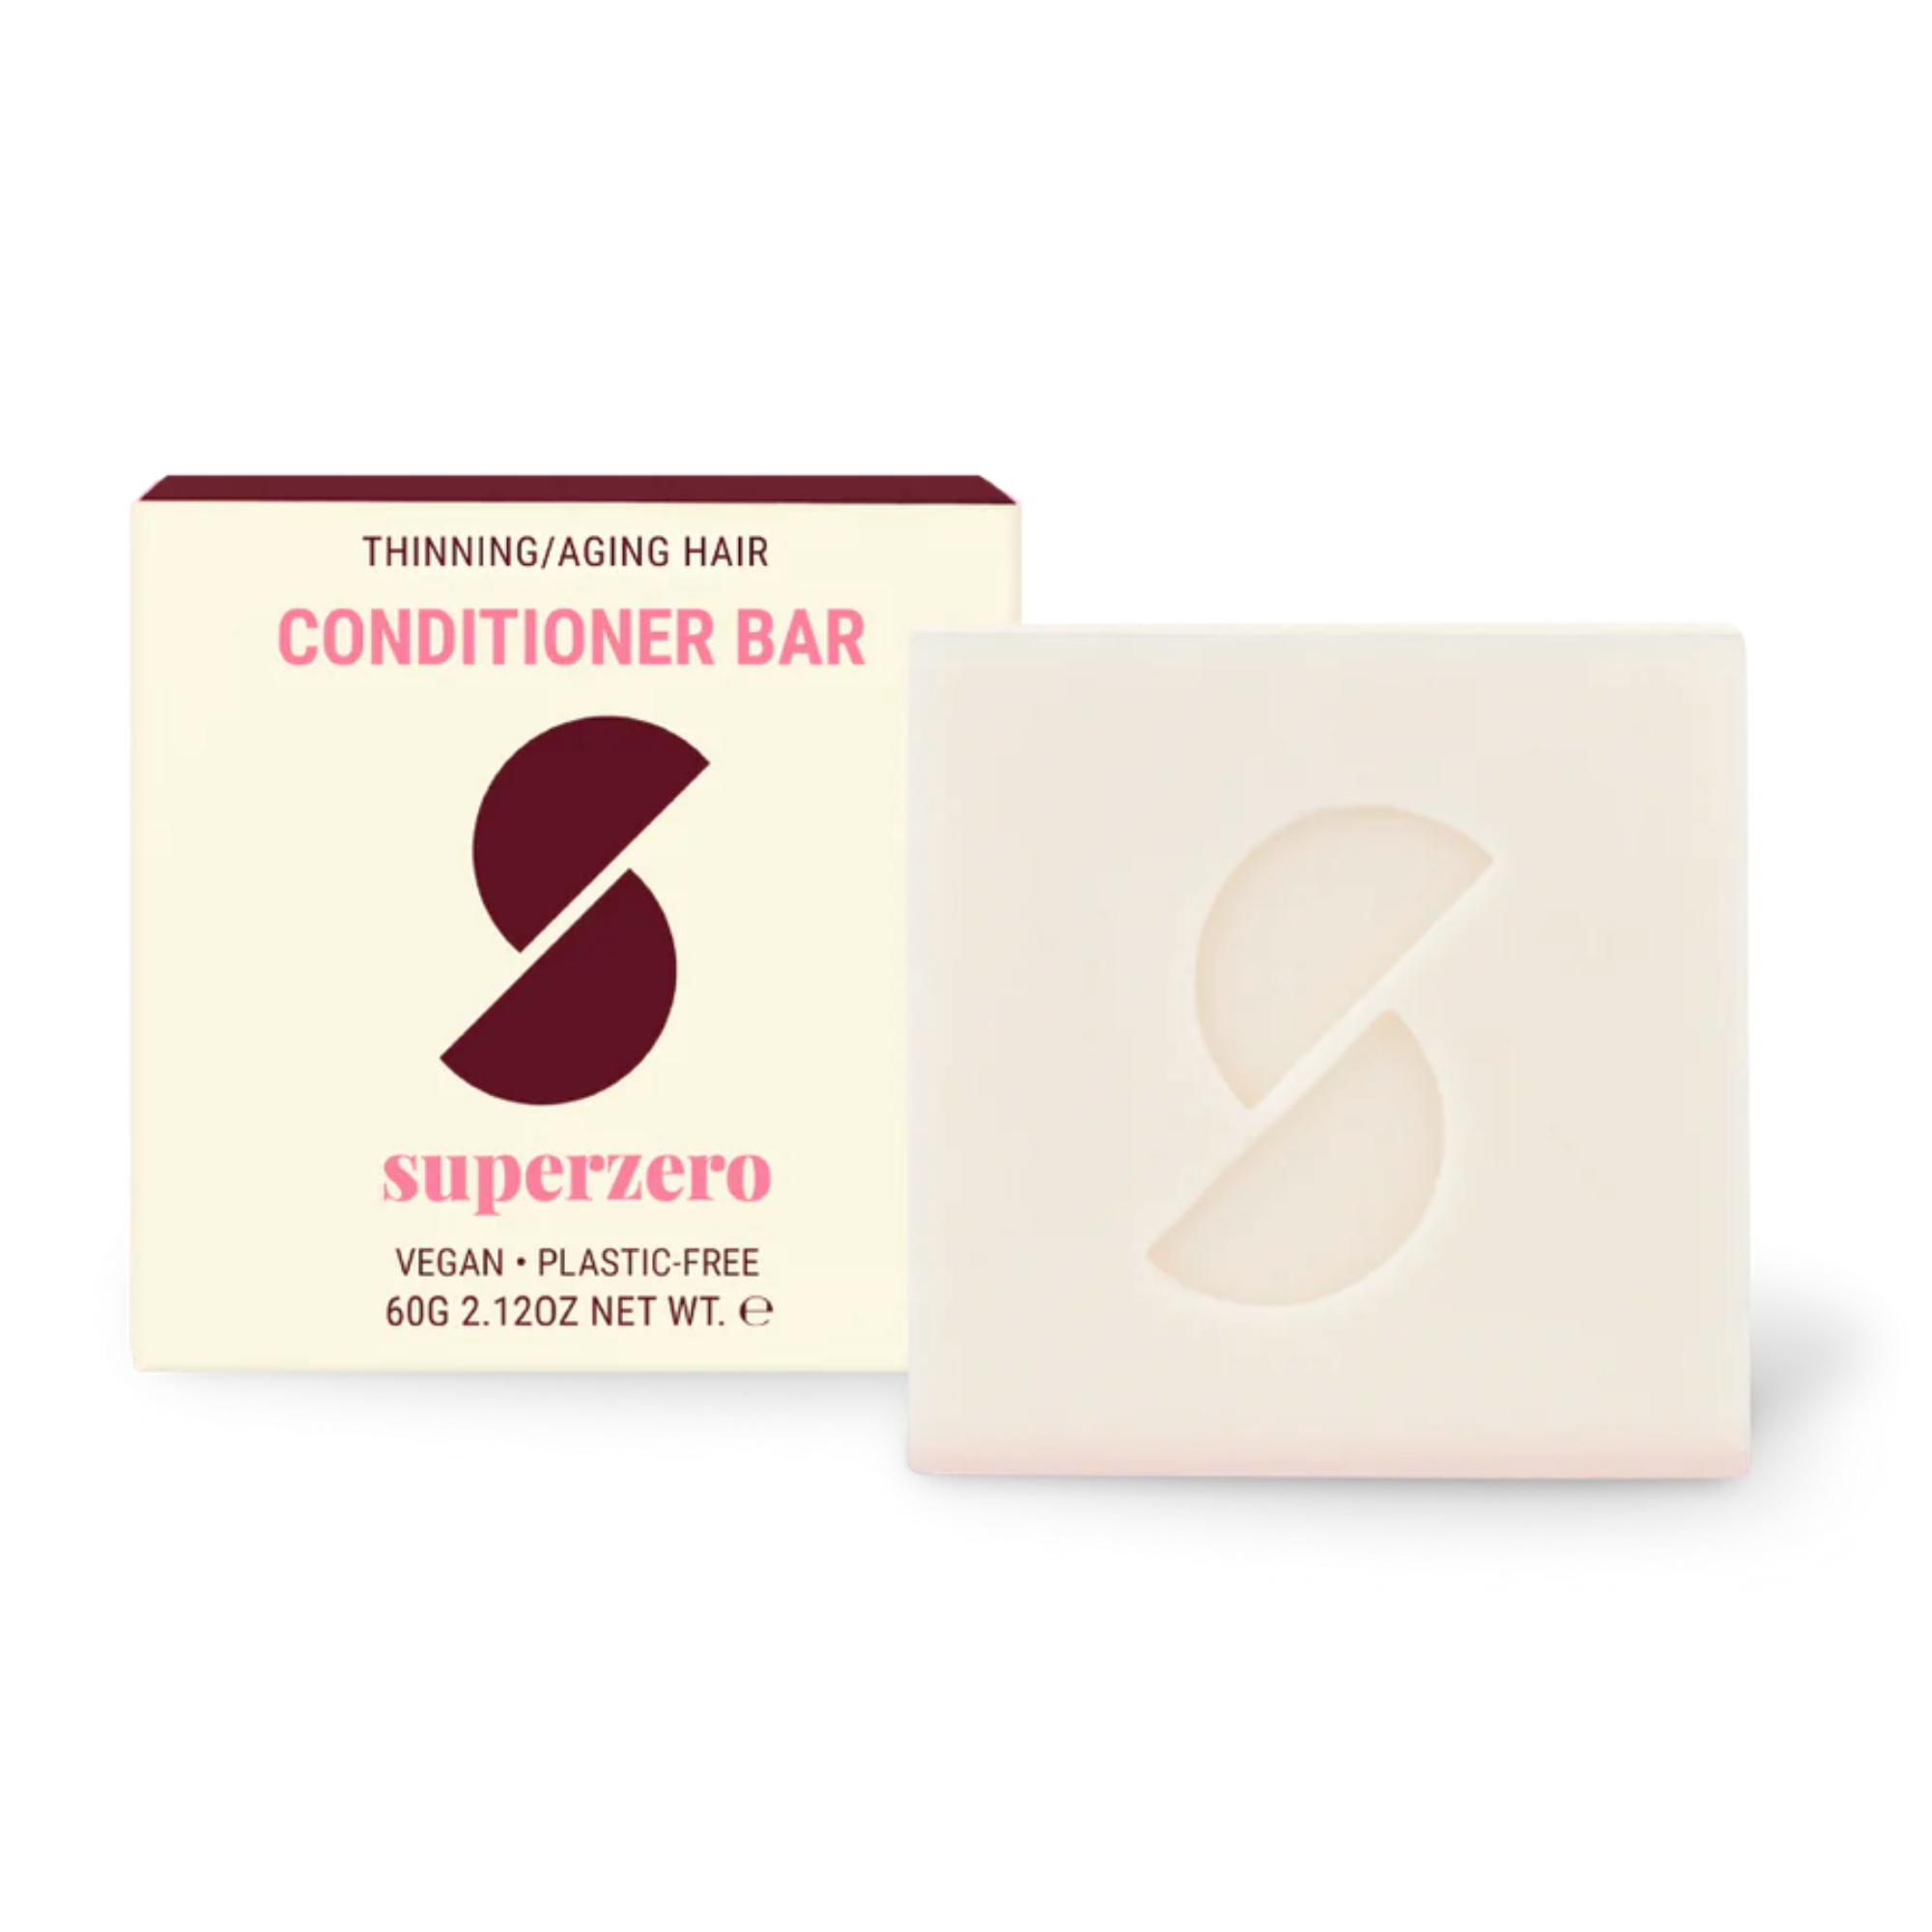 Superzero Caffeine + Provitamin b5 Conditioner Bar for Thinning, Aging Hair at Socialite Beauty Canada